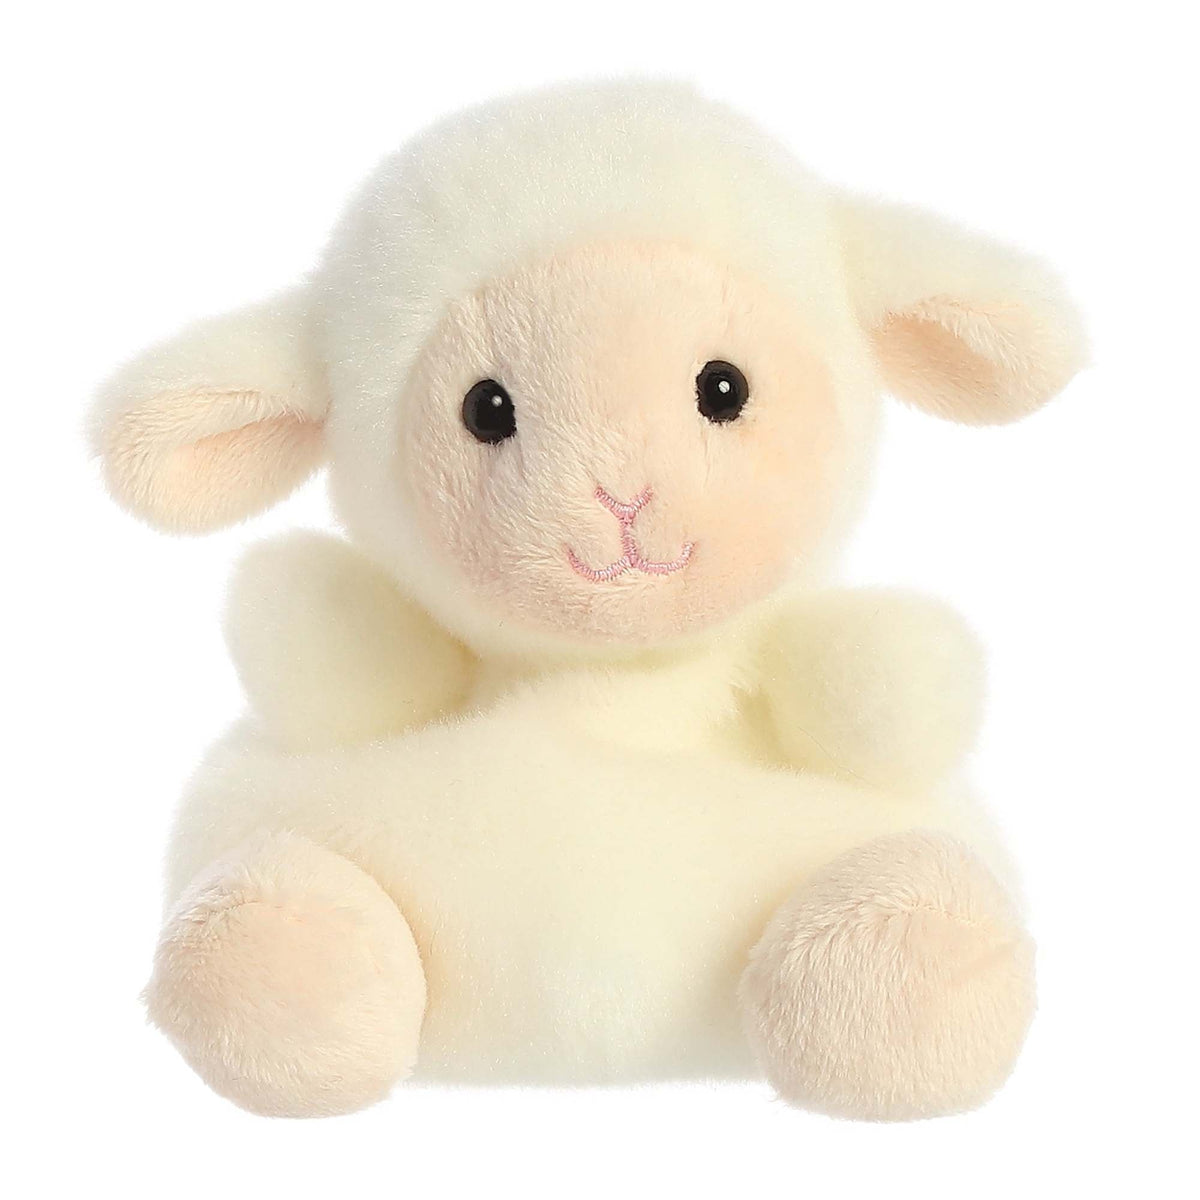 Aurora World Easter Woolly Lamb Plush, 5 Inches, 1 Count 092943334830